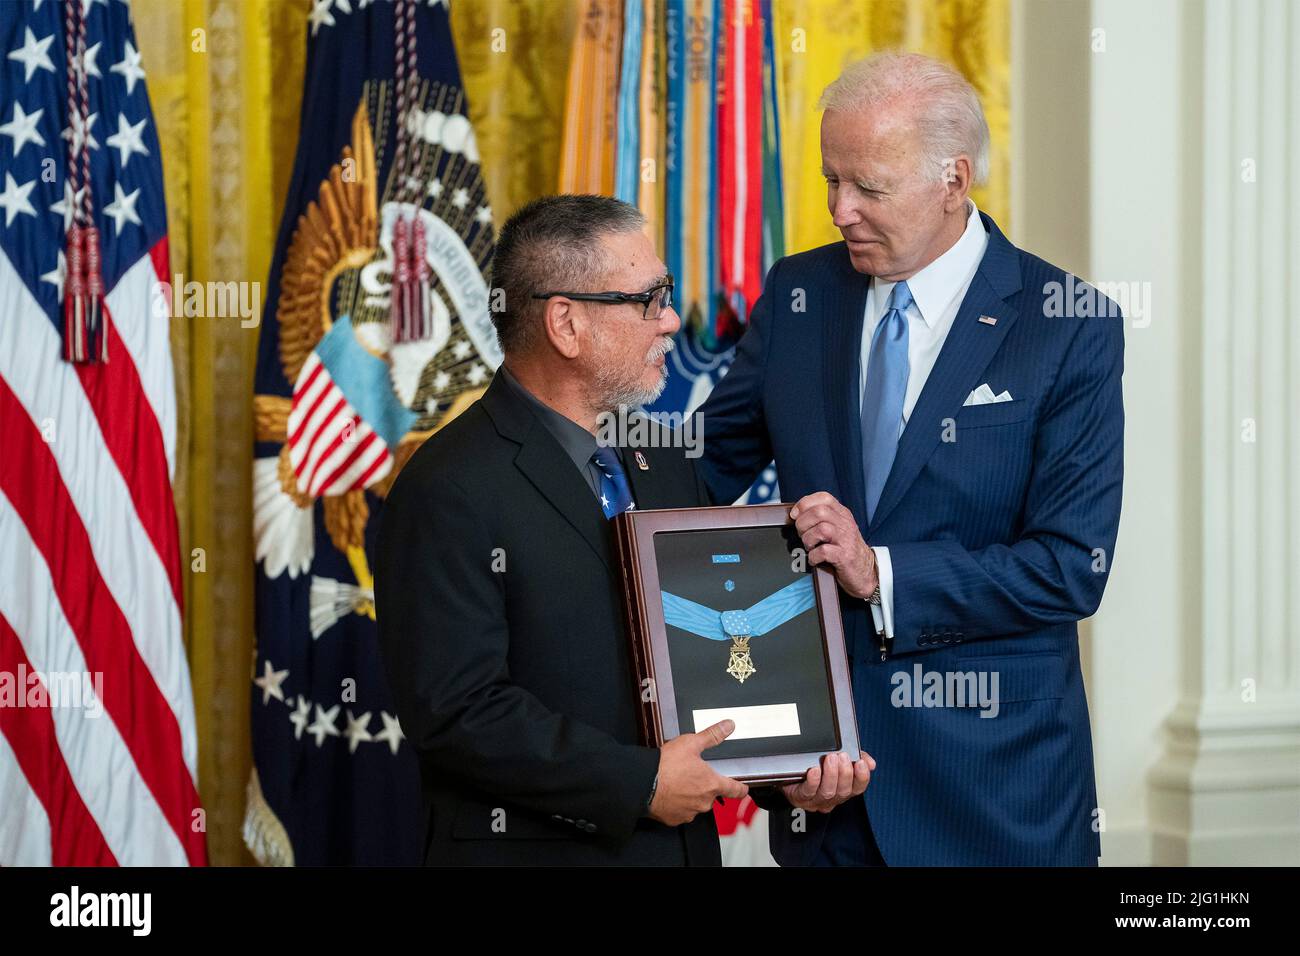 Washington, United States Of America. 05th July, 2022. Washington, United States of America. 05 July, 2022. John Kaneshiro, left, accepts the Medal of Honor from U.S President Joe Biden, right, on behalf of his father, Staff Sgt. Edward Kaneshiro for his actions during the Vietnam War at a ceremony in the East Room of the White House, July 5, 2022 in Washington, DC Credit: Adam Schultz/White House Photo/Alamy Live News Stock Photo